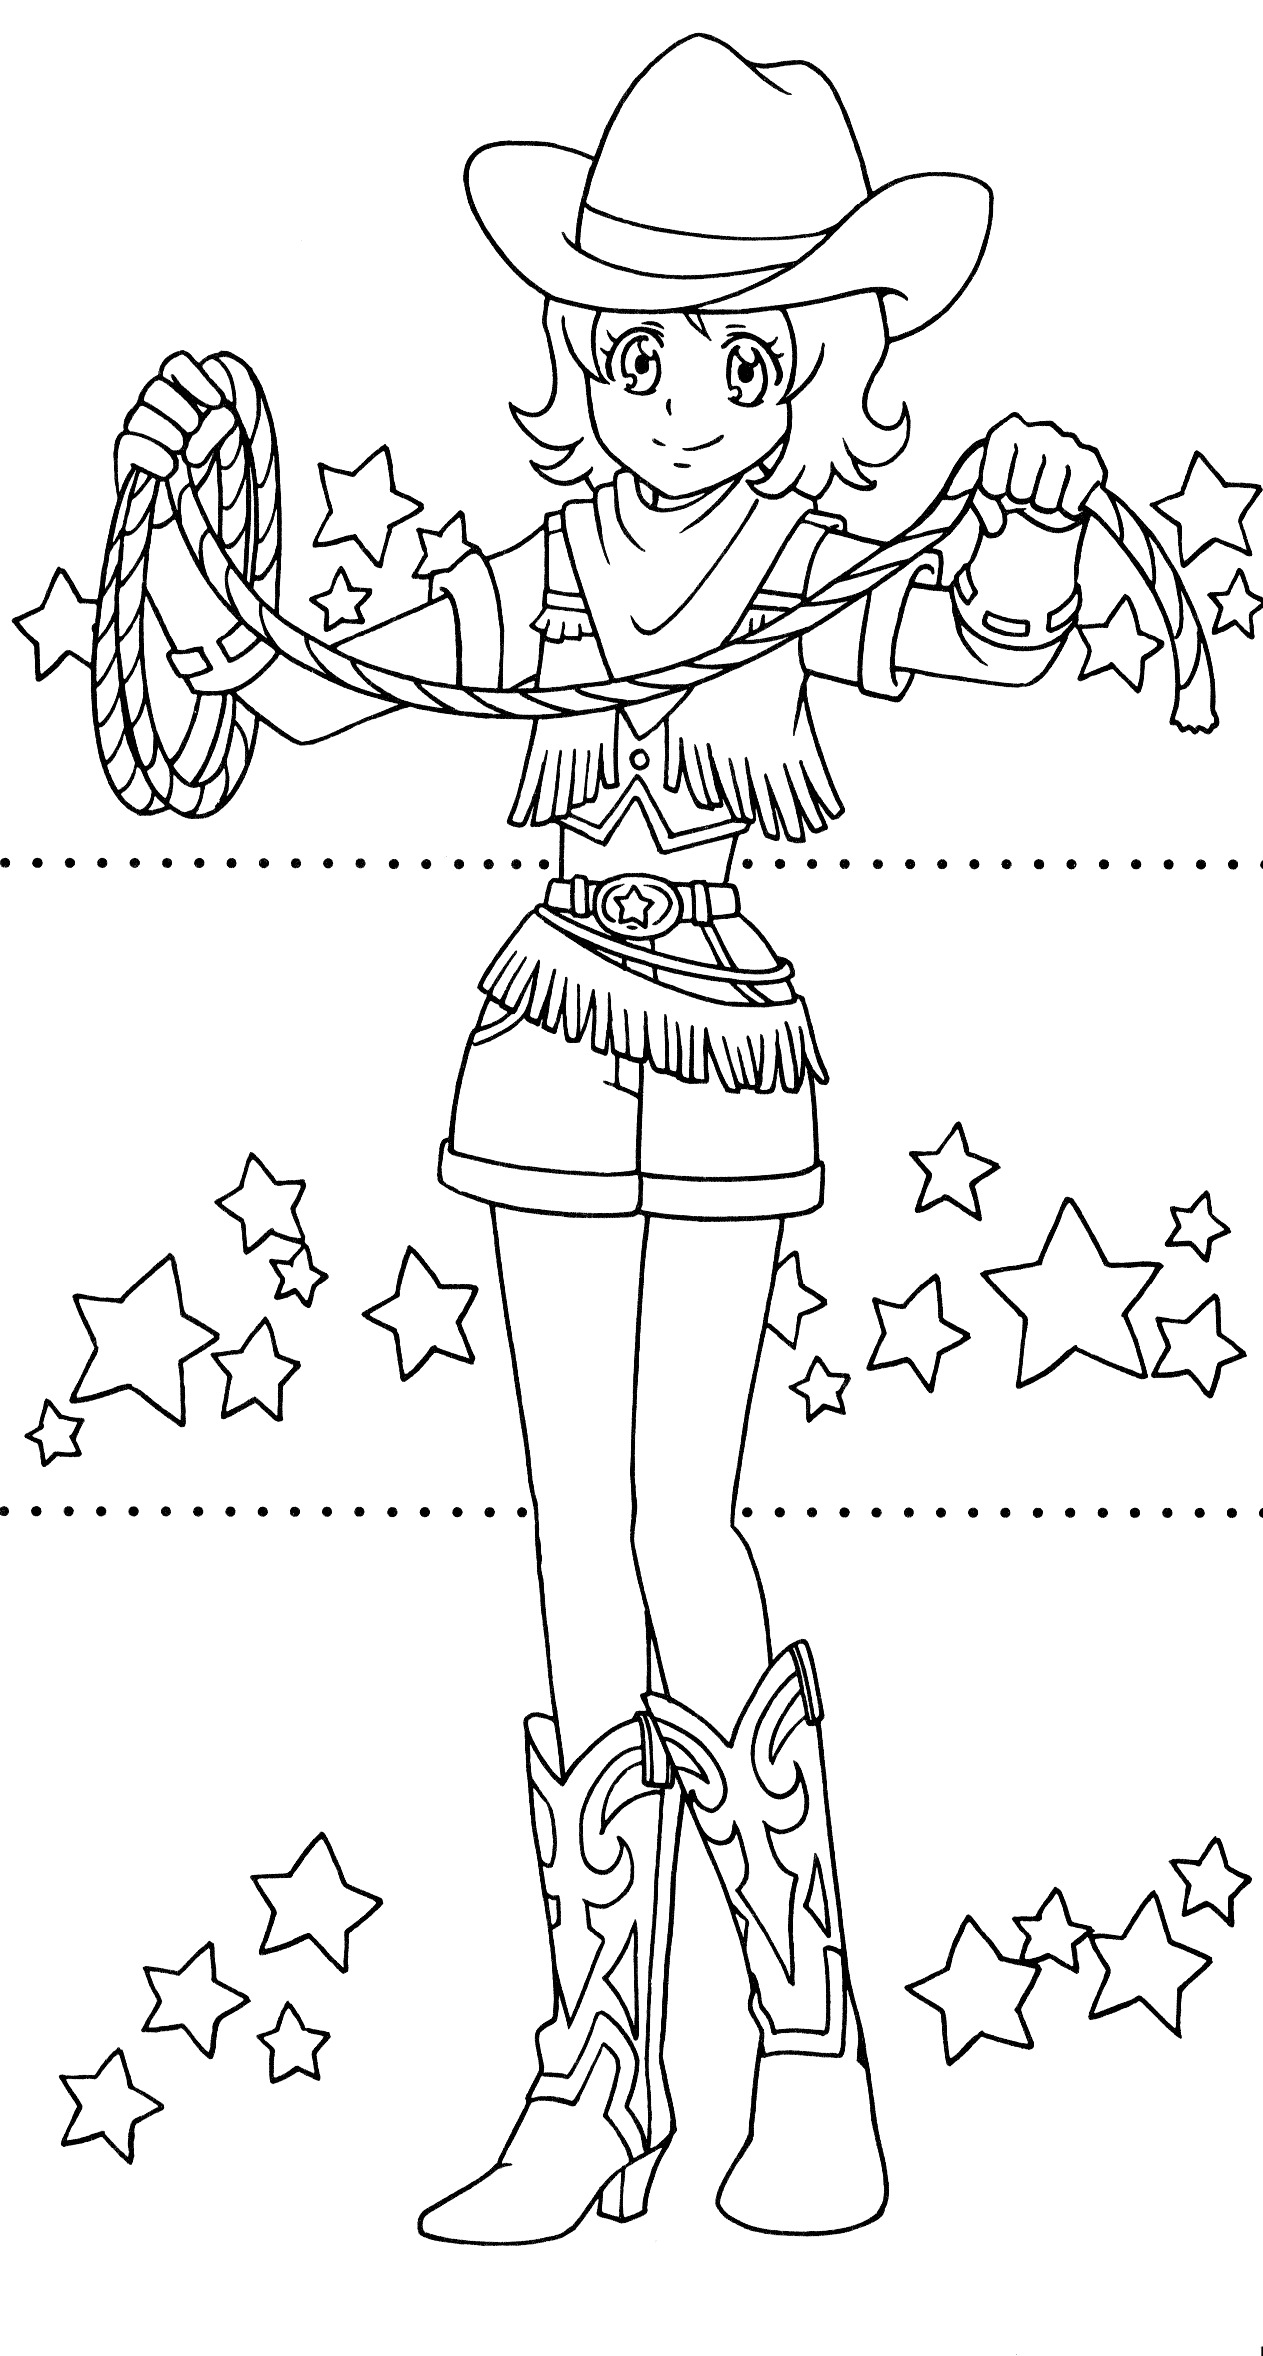 Happiness Charge Precure Dressup Coloring Book 15